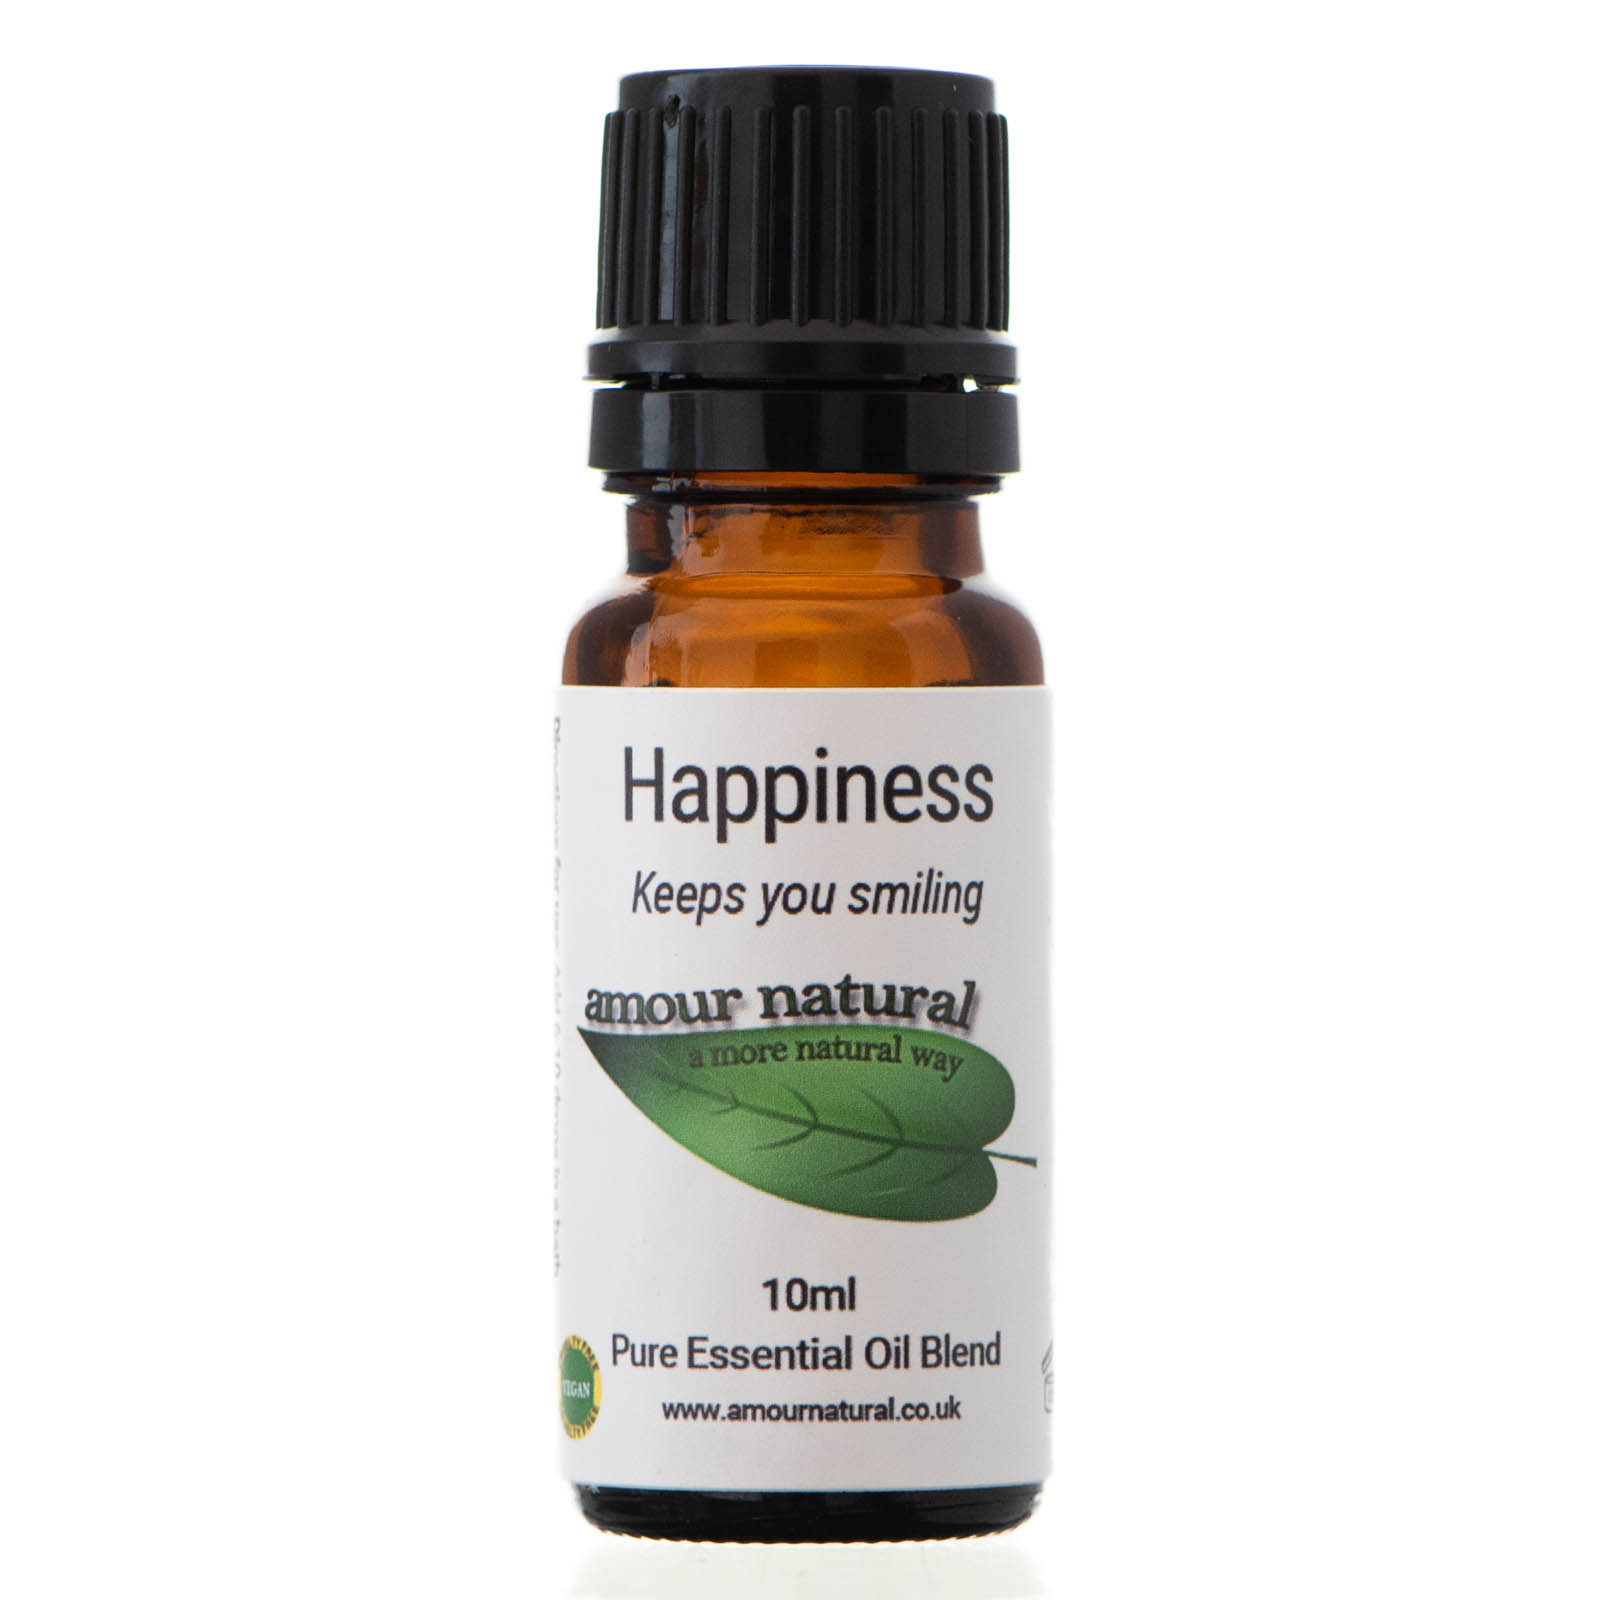 Happiness blend 10ml